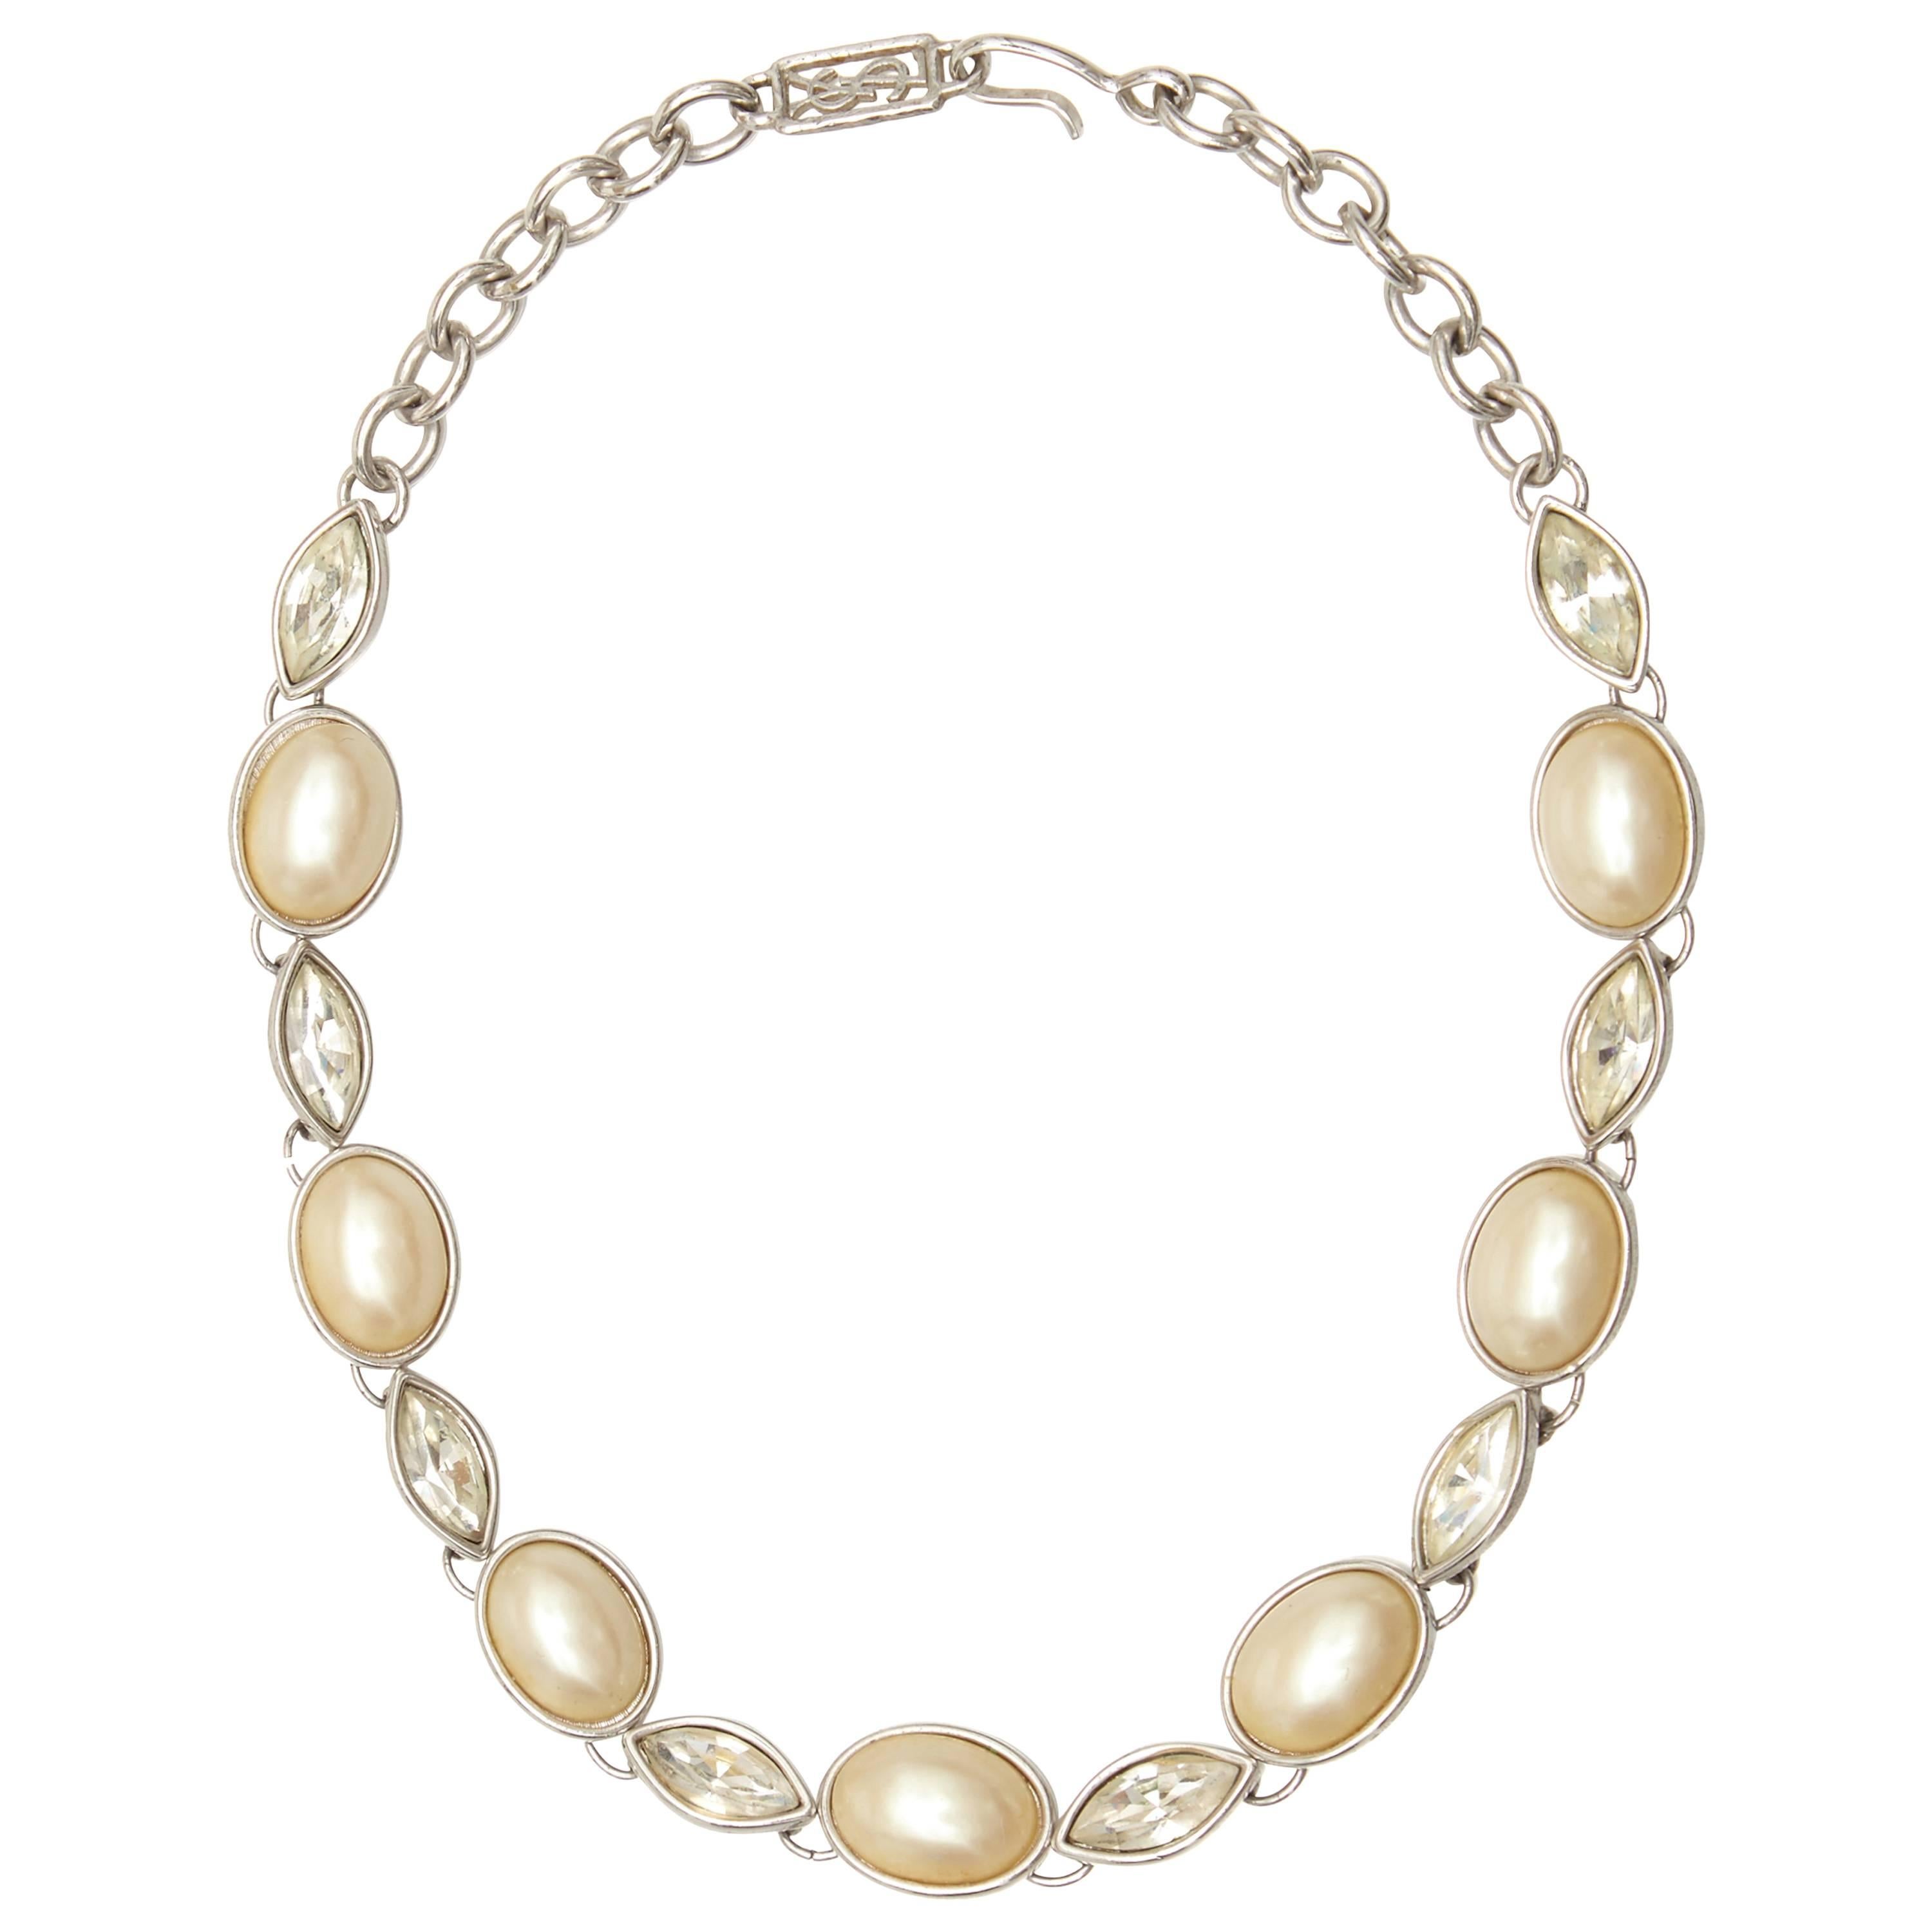 1980s Yves Saint Laurent Silver and Pearl Necklace